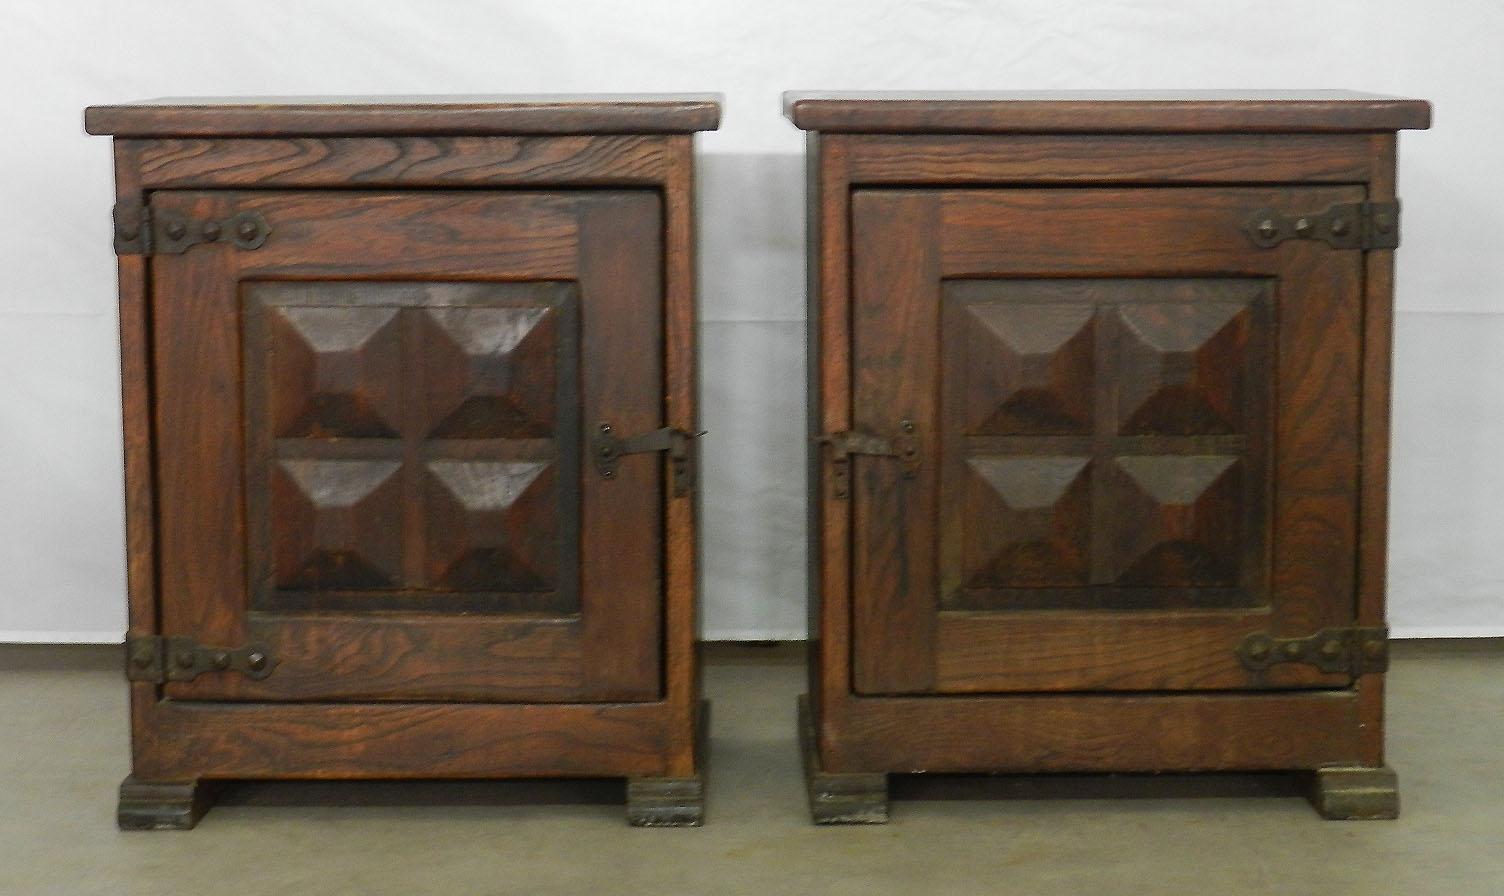 Pair of Spanish nightstands side cabinets bedside tables, midcentury
Single Door with iron hinges
Single interior shelf
Good vintage condition for their age with minor marks of use these will be cleaned and waxed before shipping.